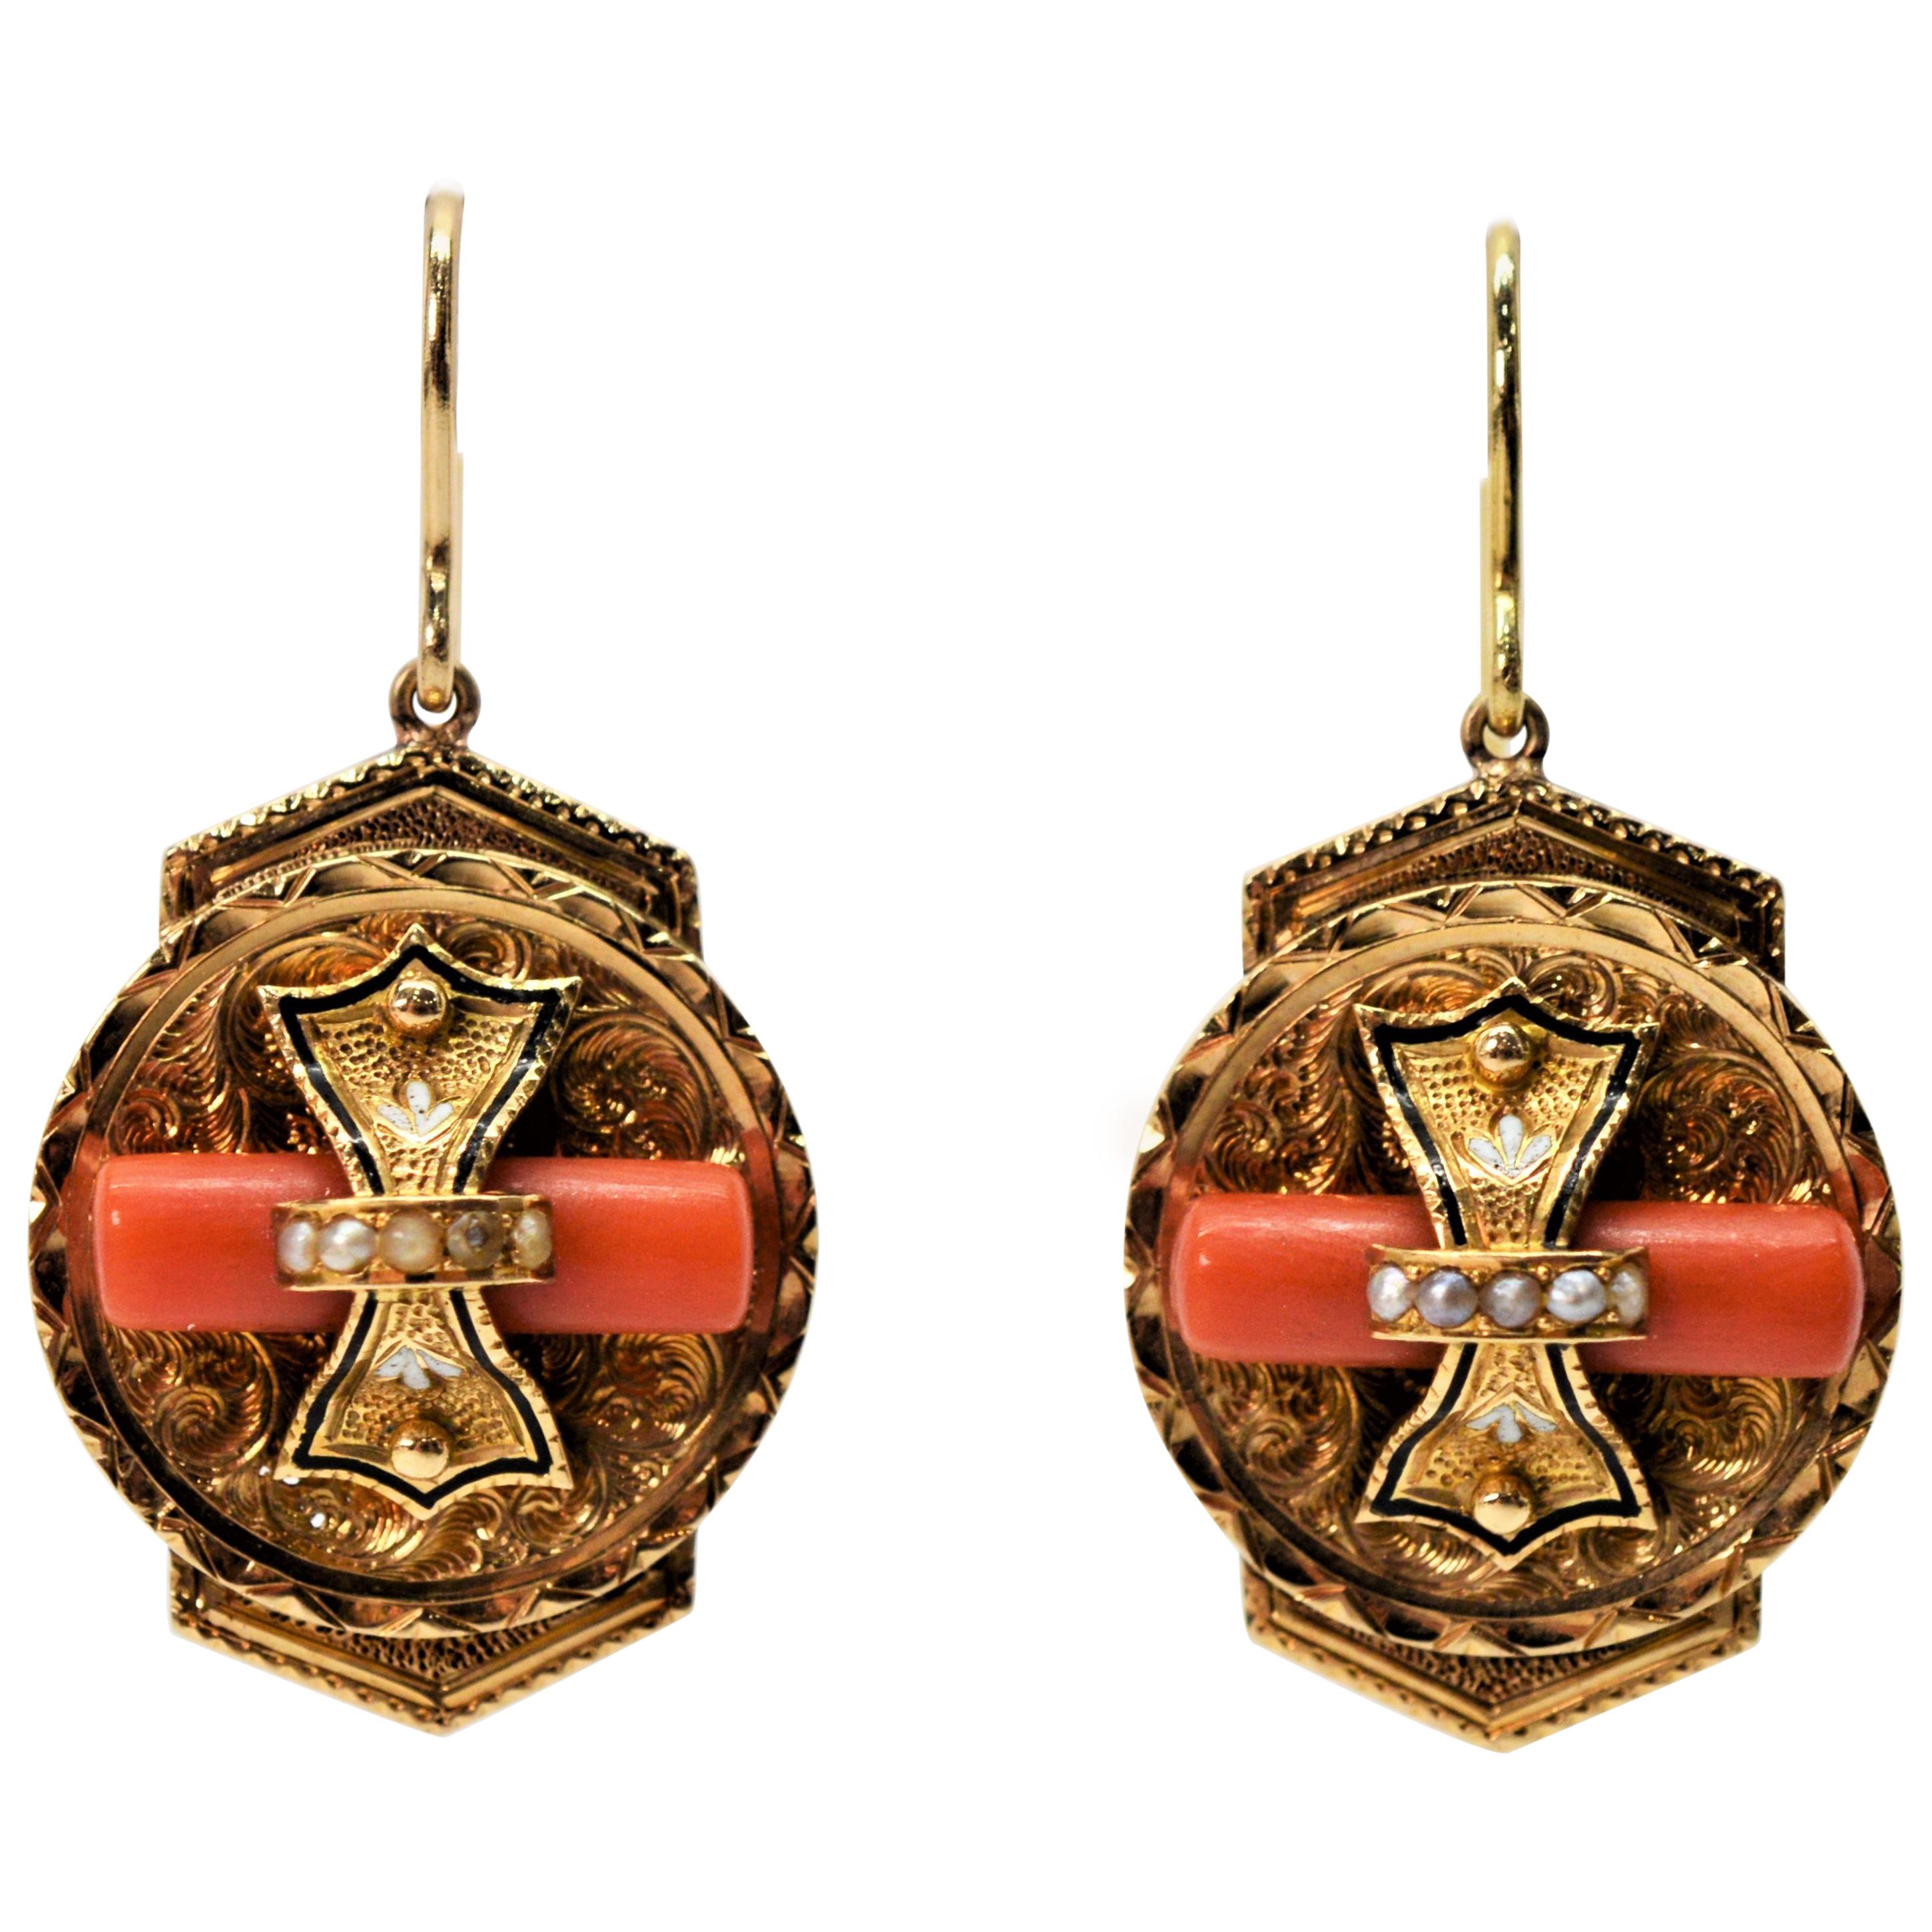 Victorian Medallion 14 Karat Yellow Gold Earrings with Coral and Pearl Accents